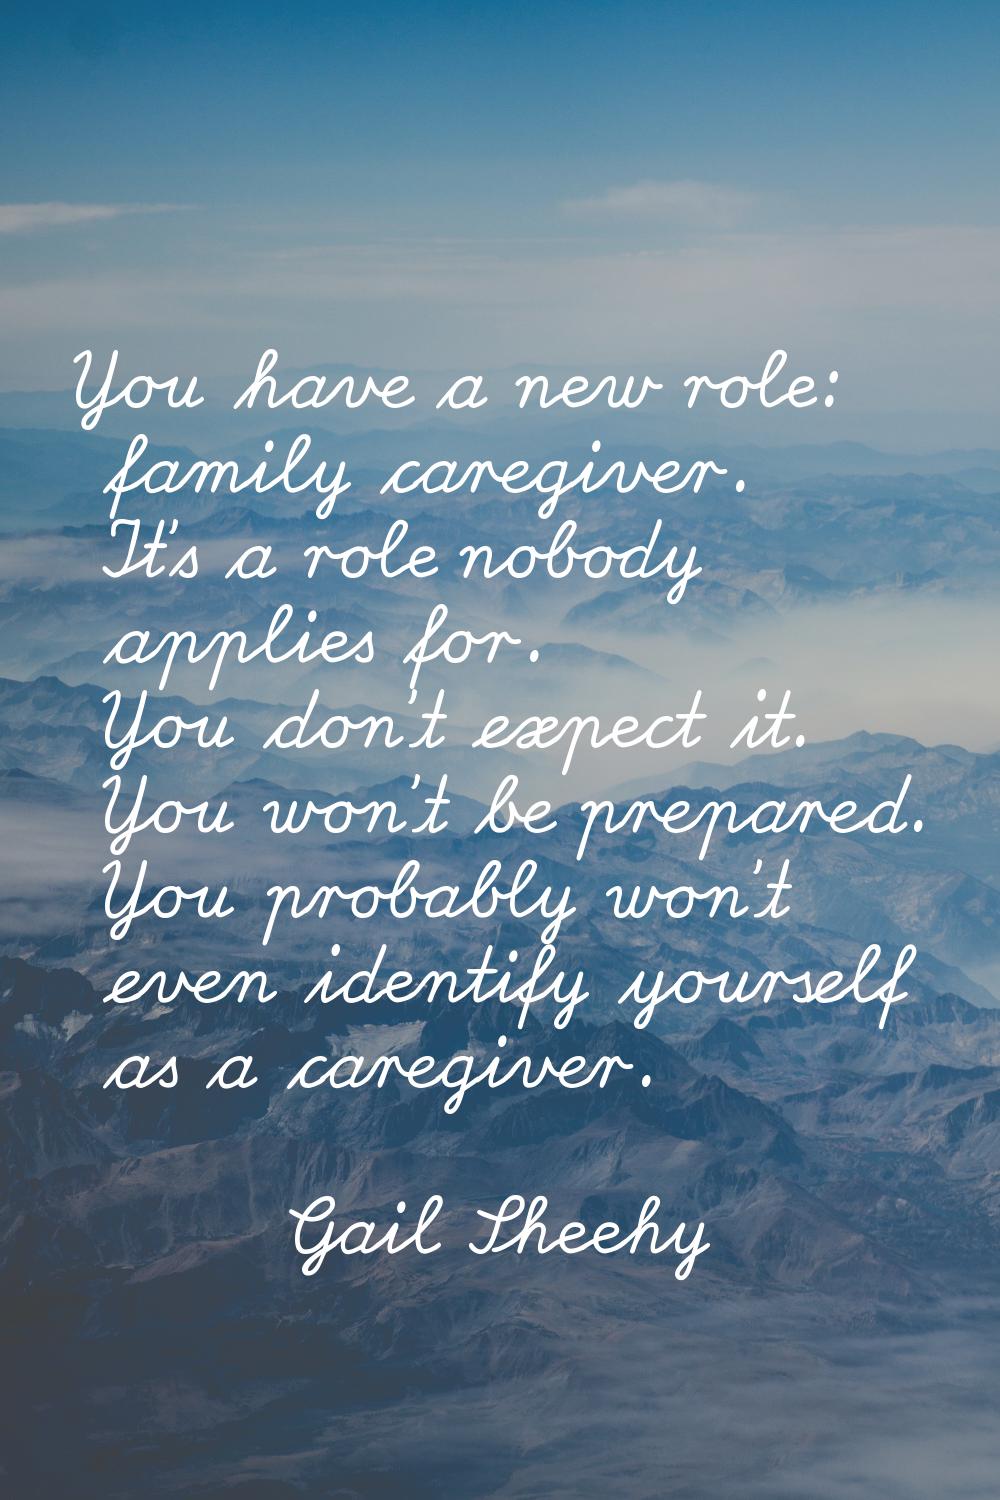 You have a new role: family caregiver. It's a role nobody applies for. You don't expect it. You won